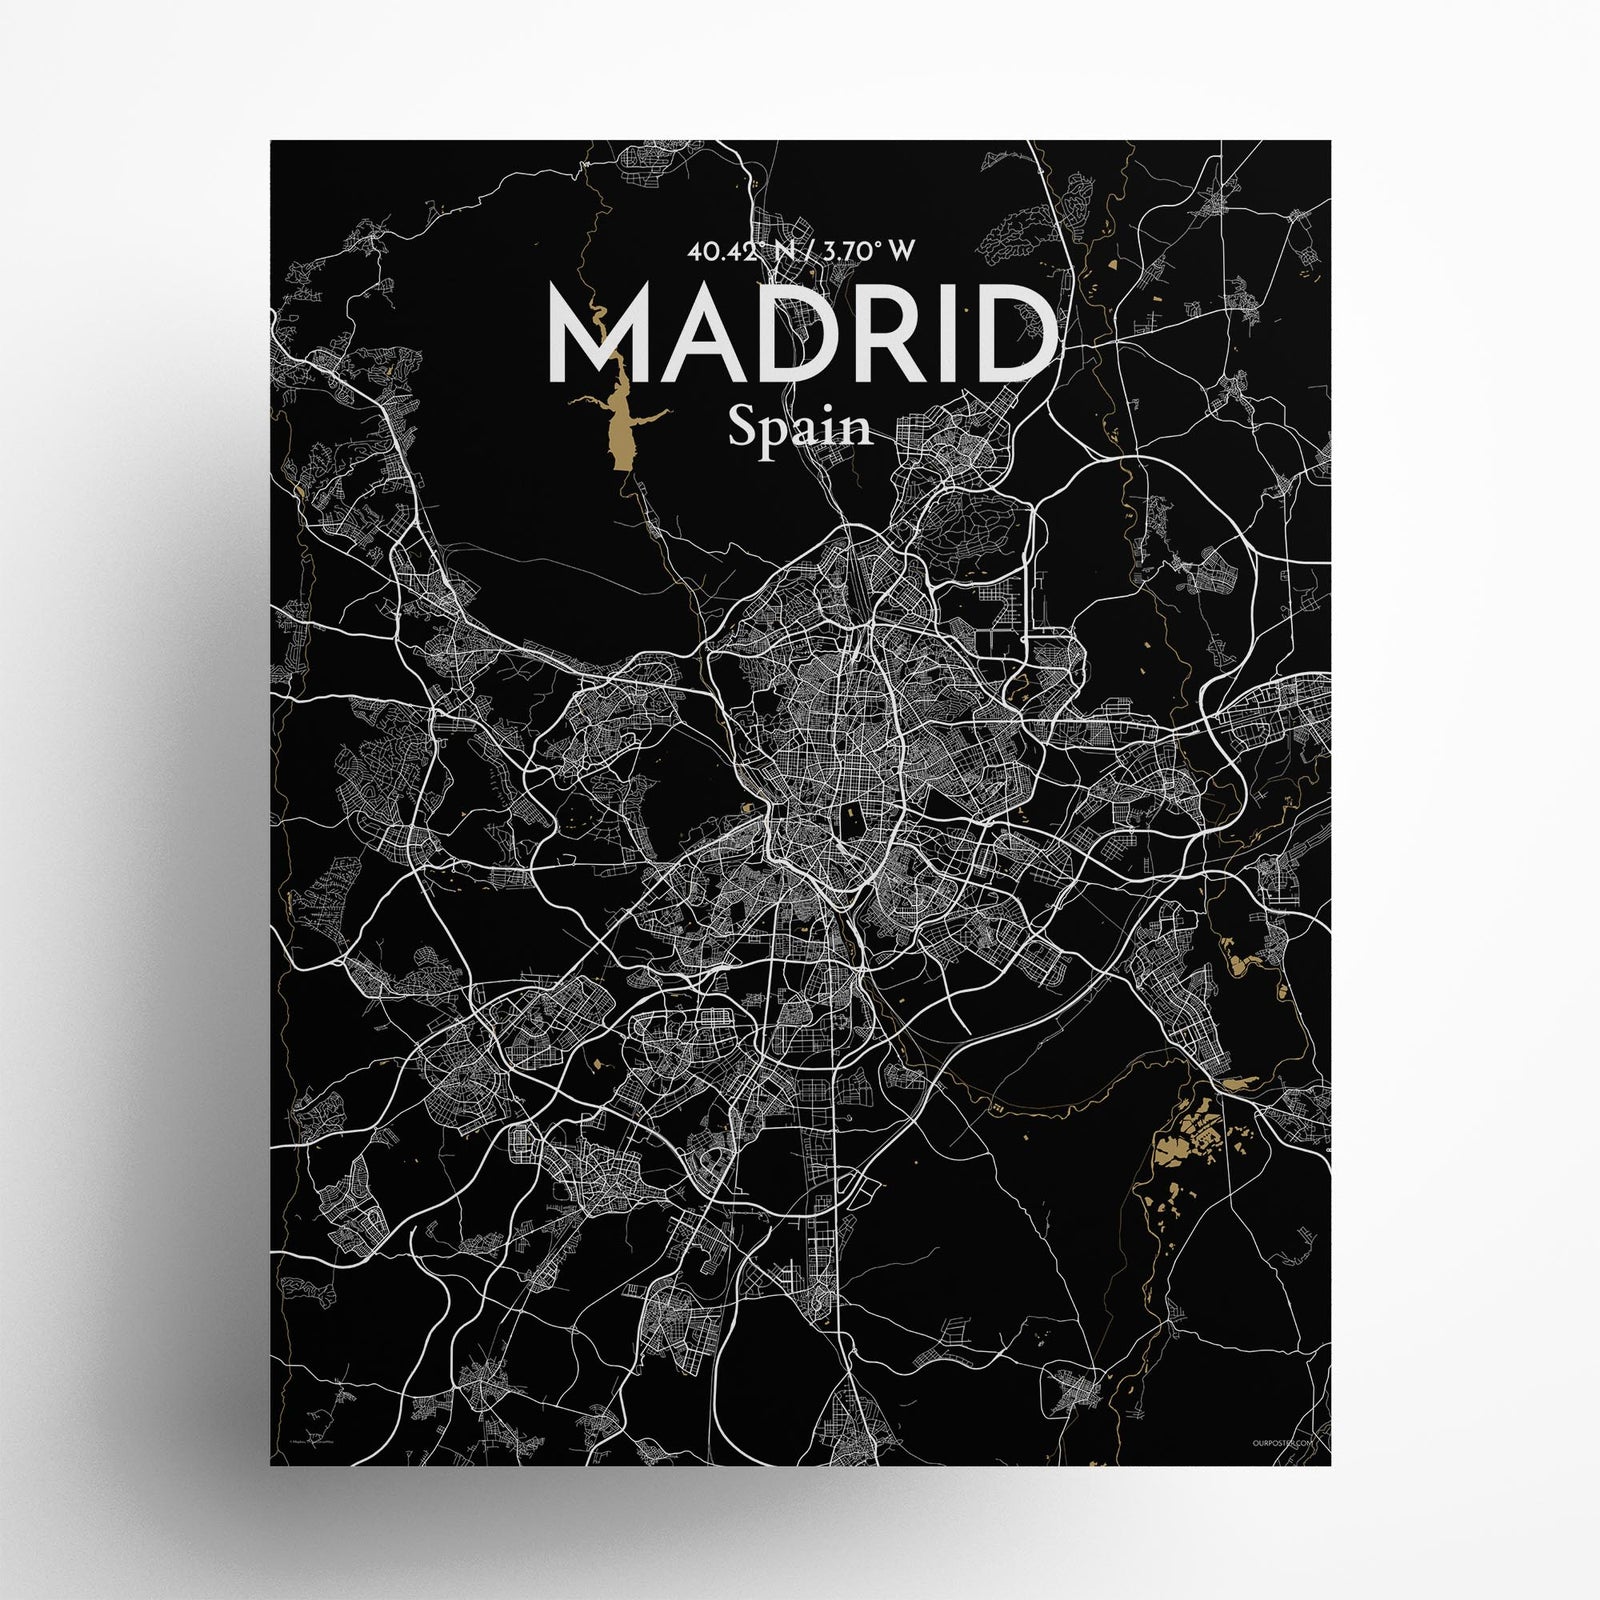 Madrid City Map Poster